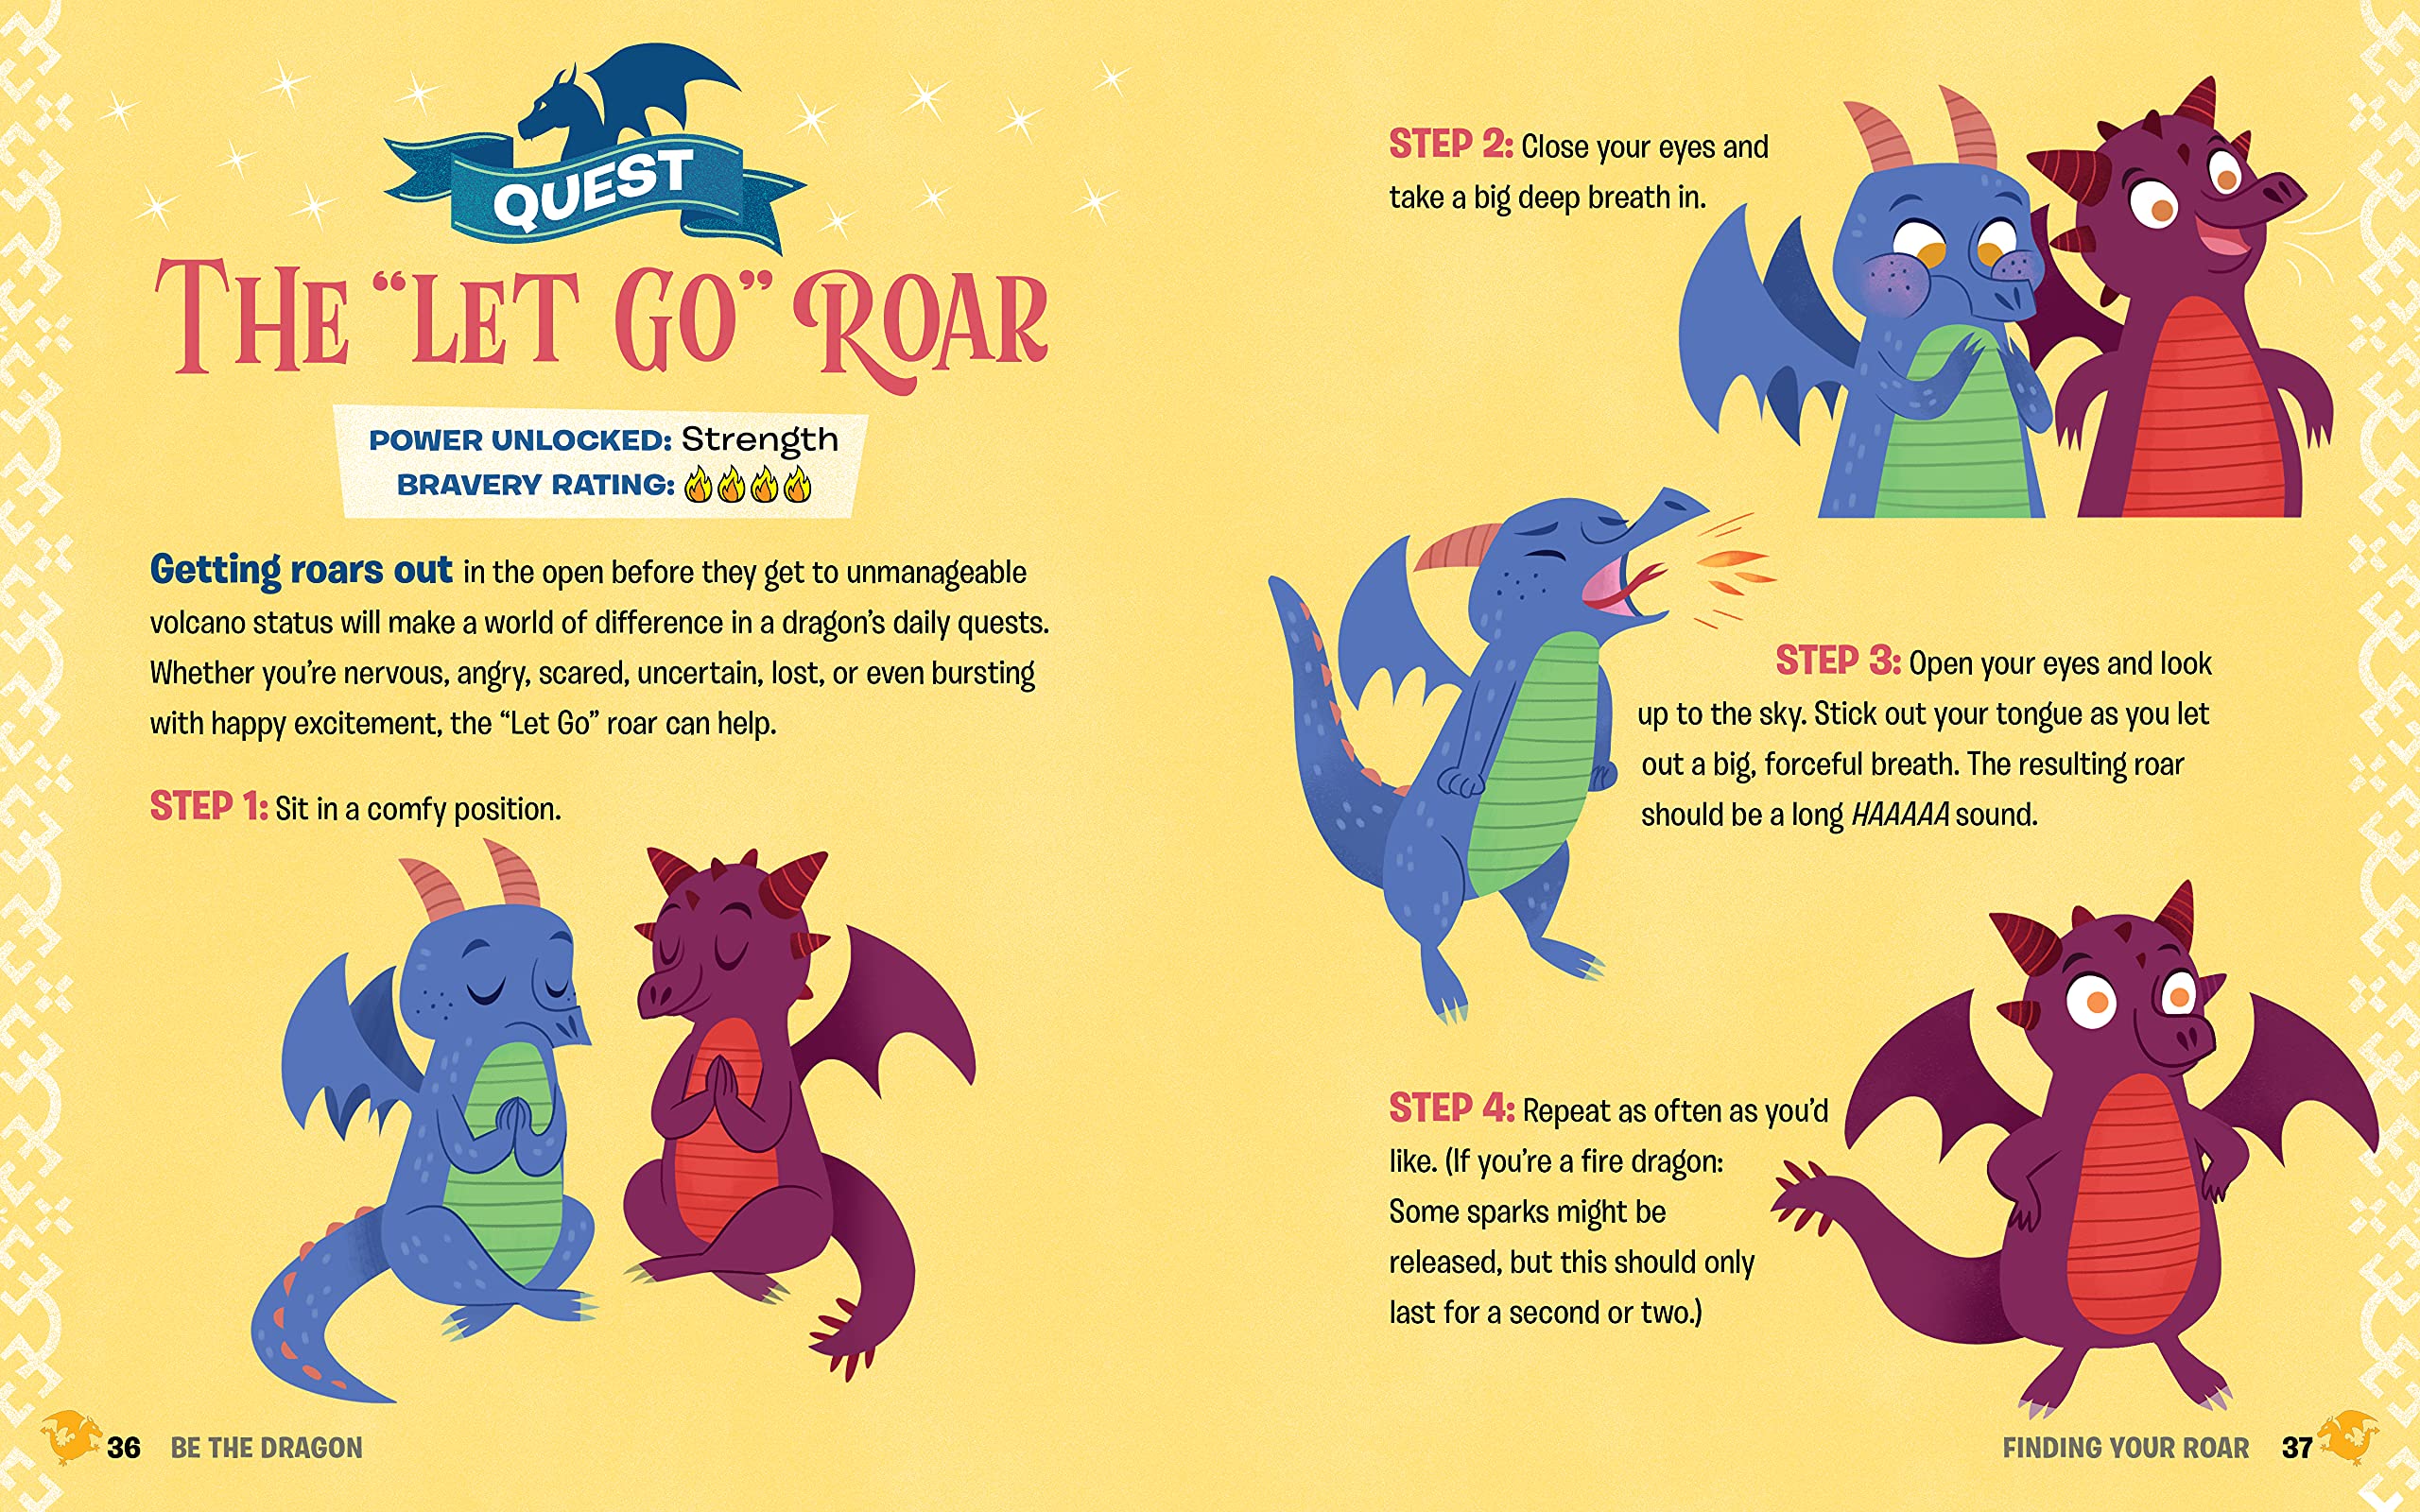 Be the Dragon: 9 Keys to Unlocking Your Inner Magic: Roar with Confidence and Slay Your Fears with Quizzes, Quests, and More! - The English Bookshop Kuwait